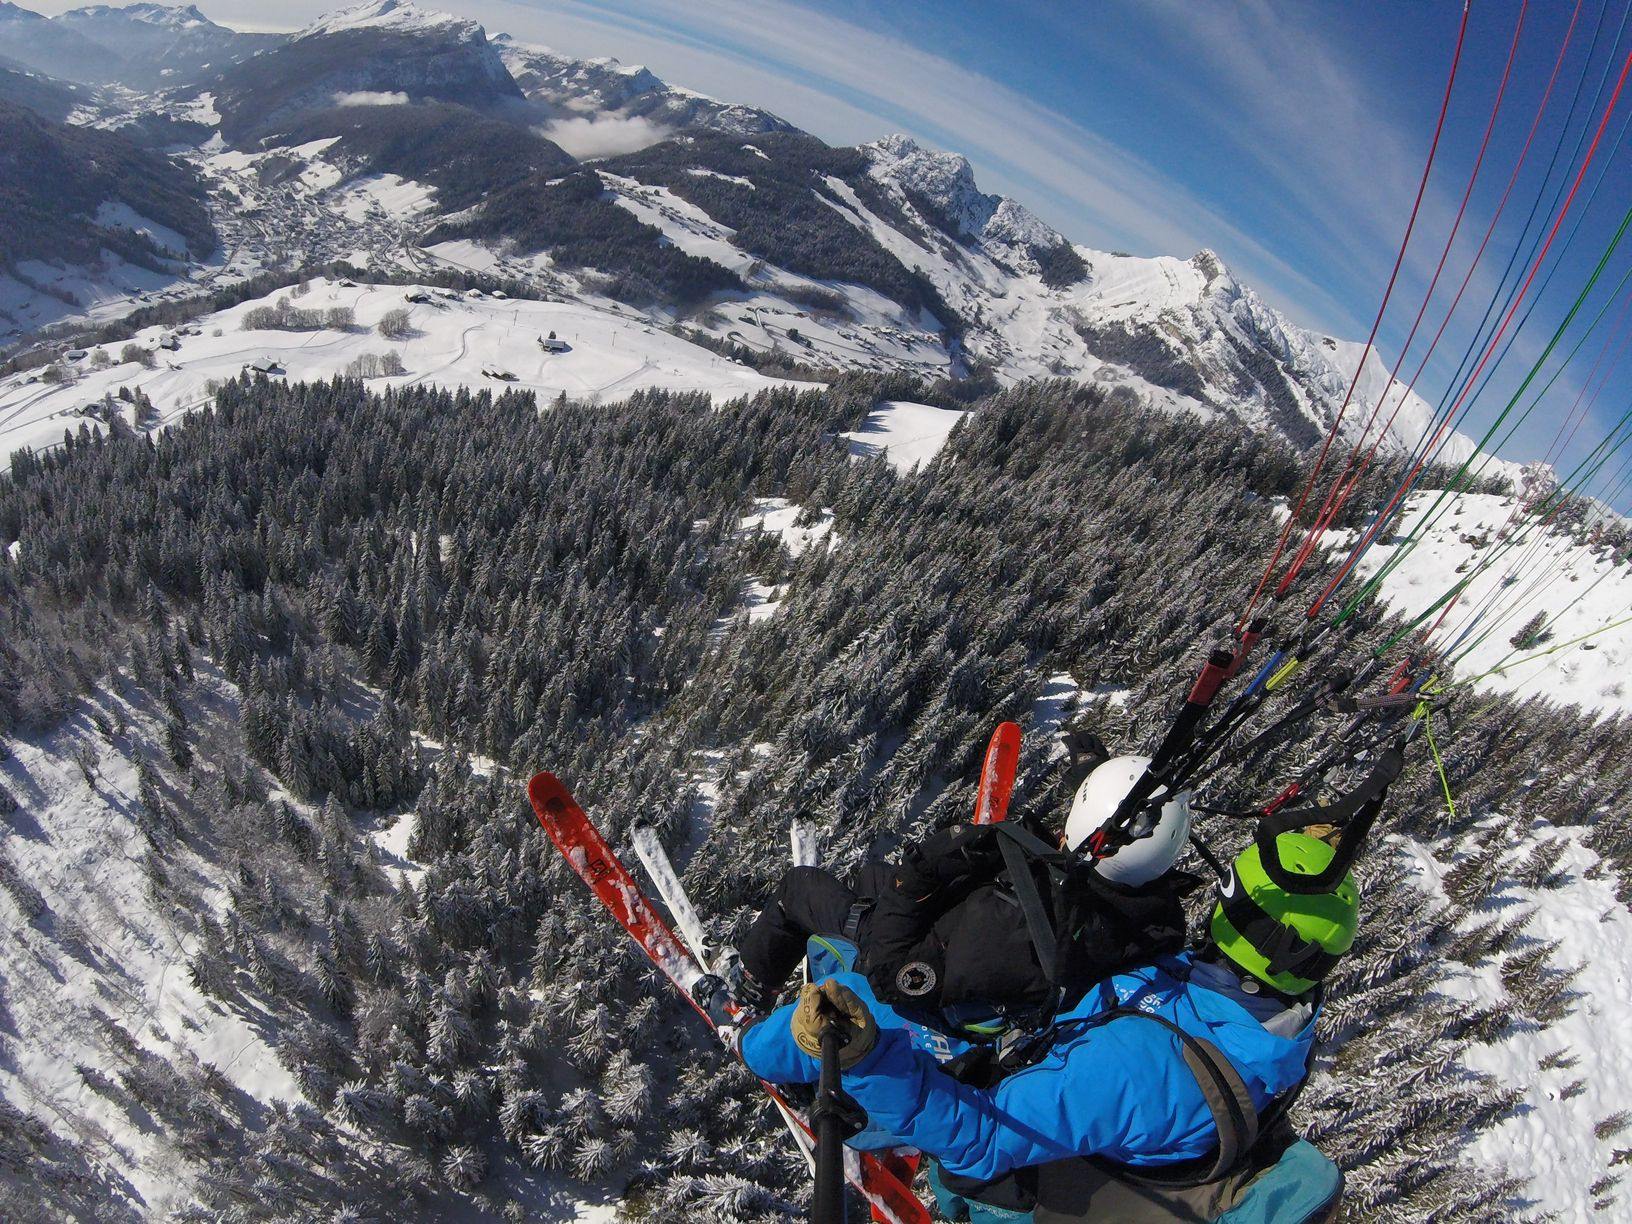 Paragliding on skis